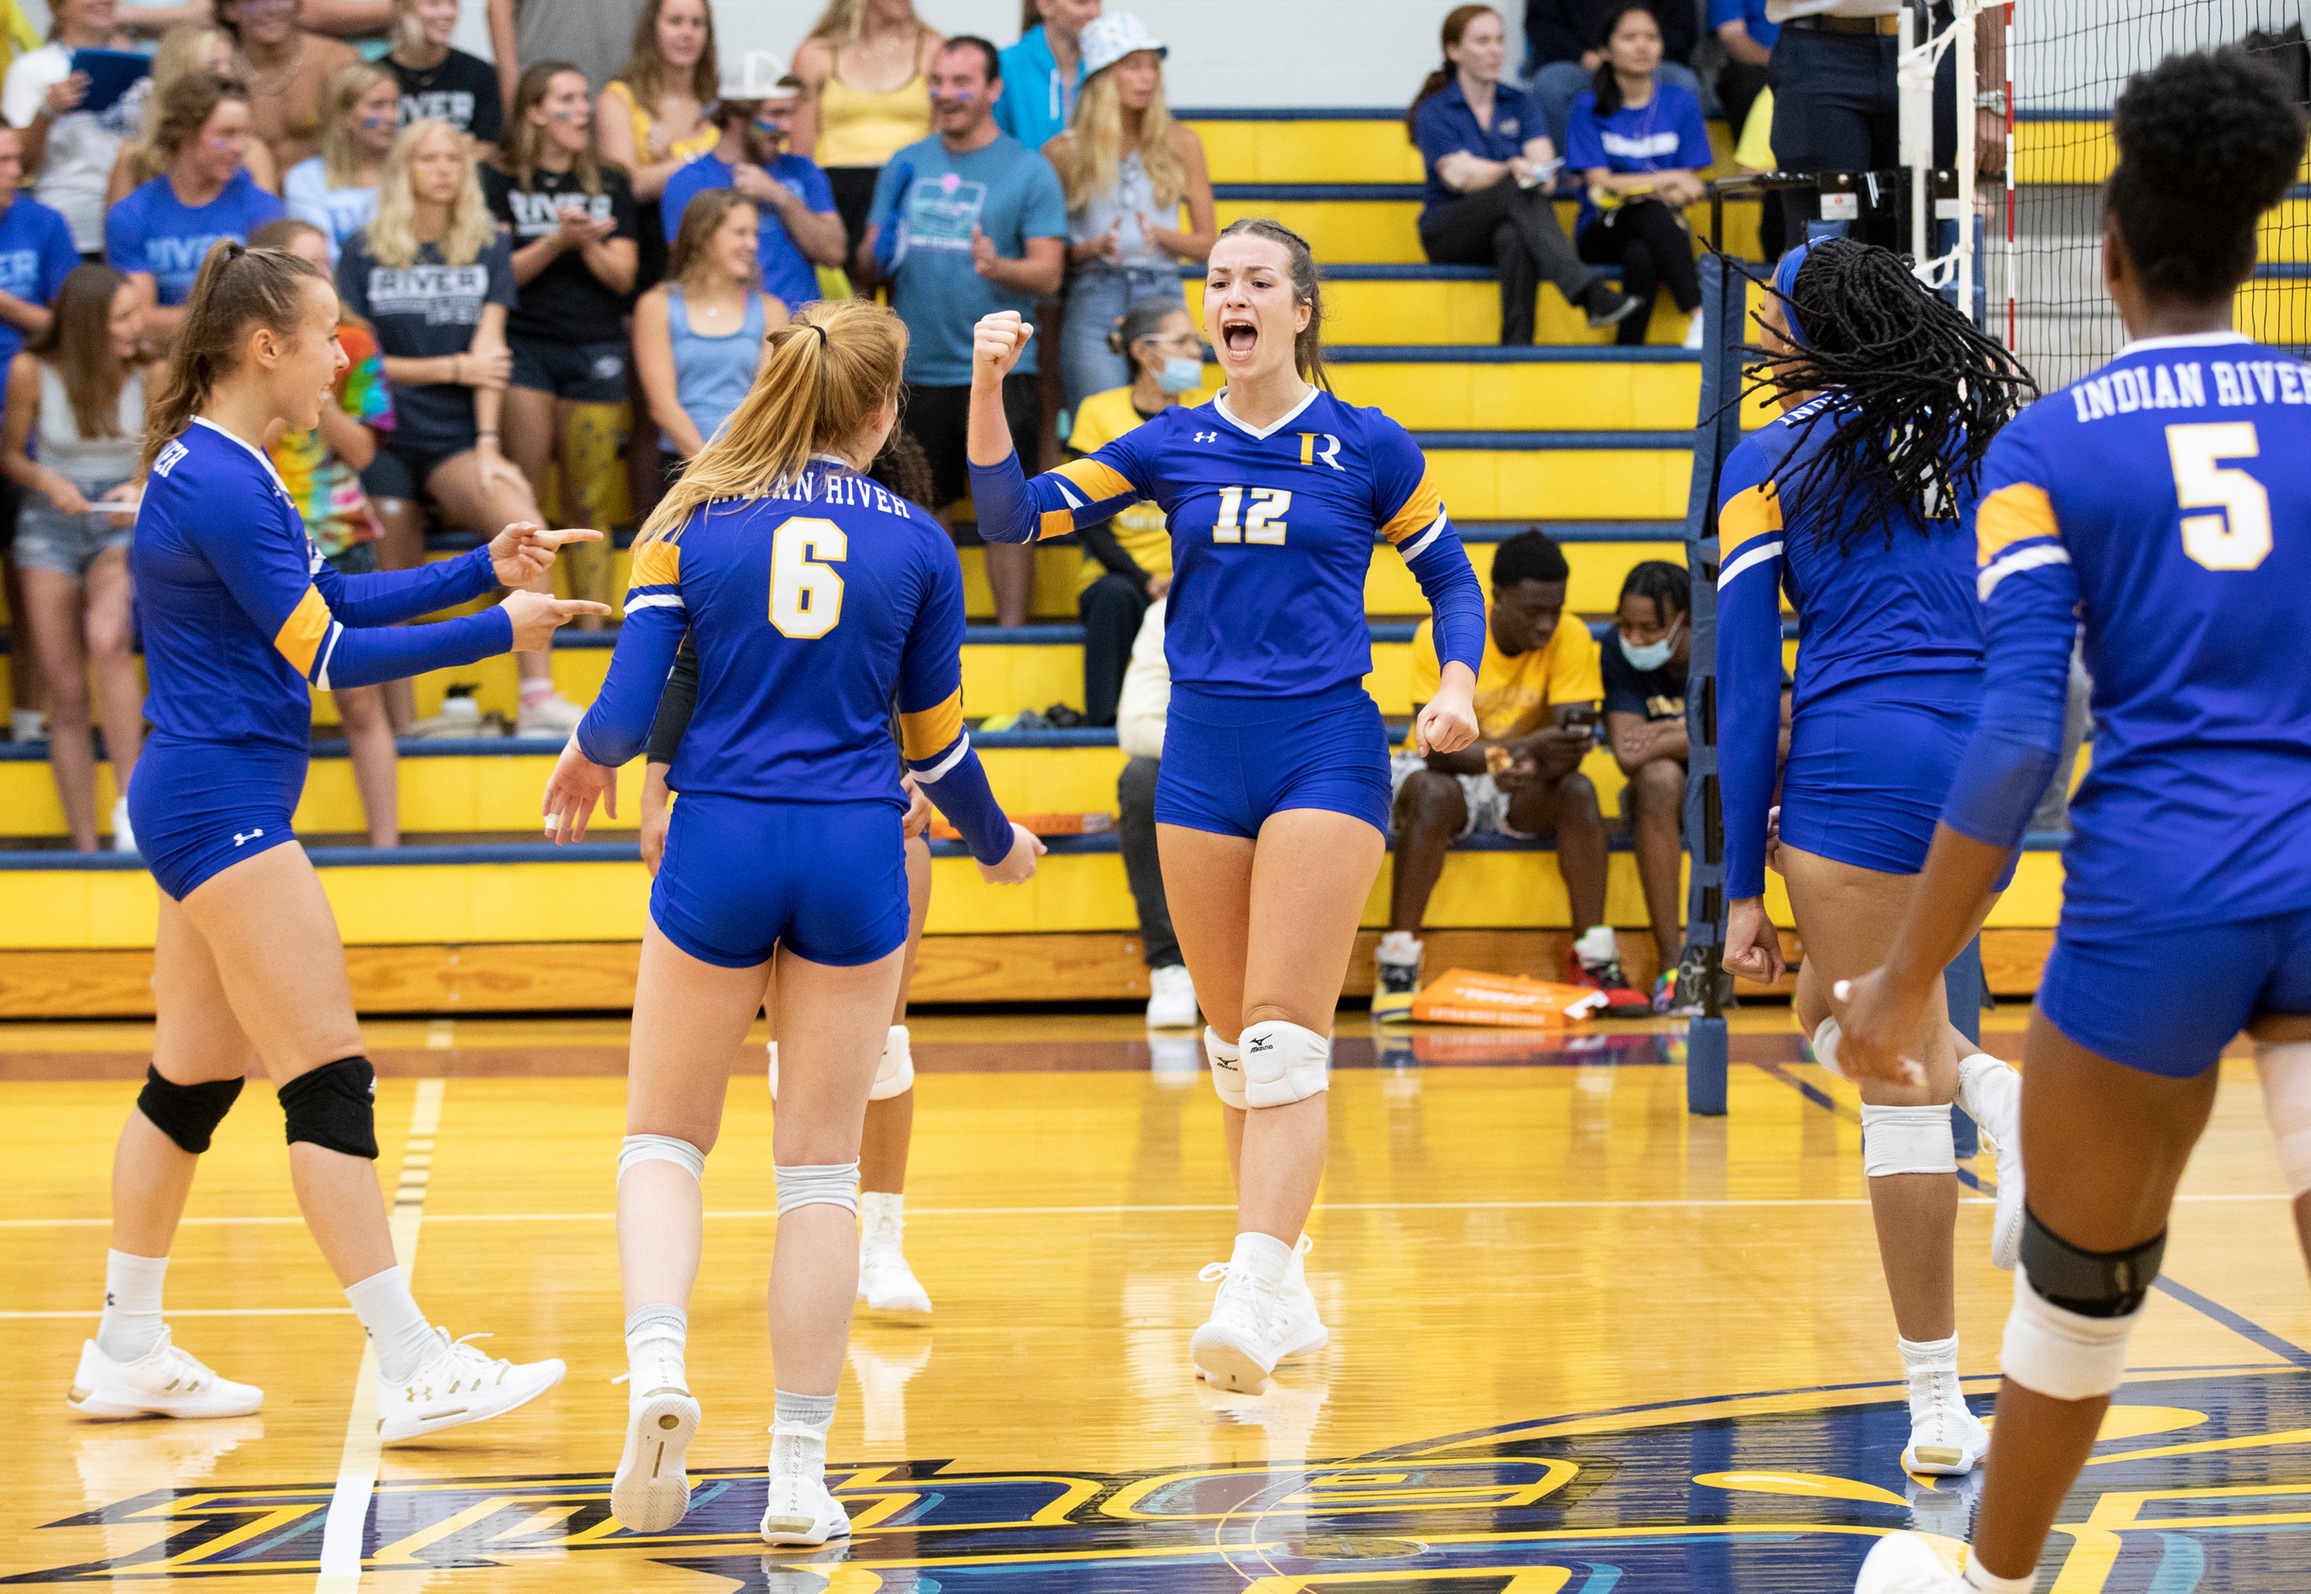 Indian River gets big 5 set win on the road